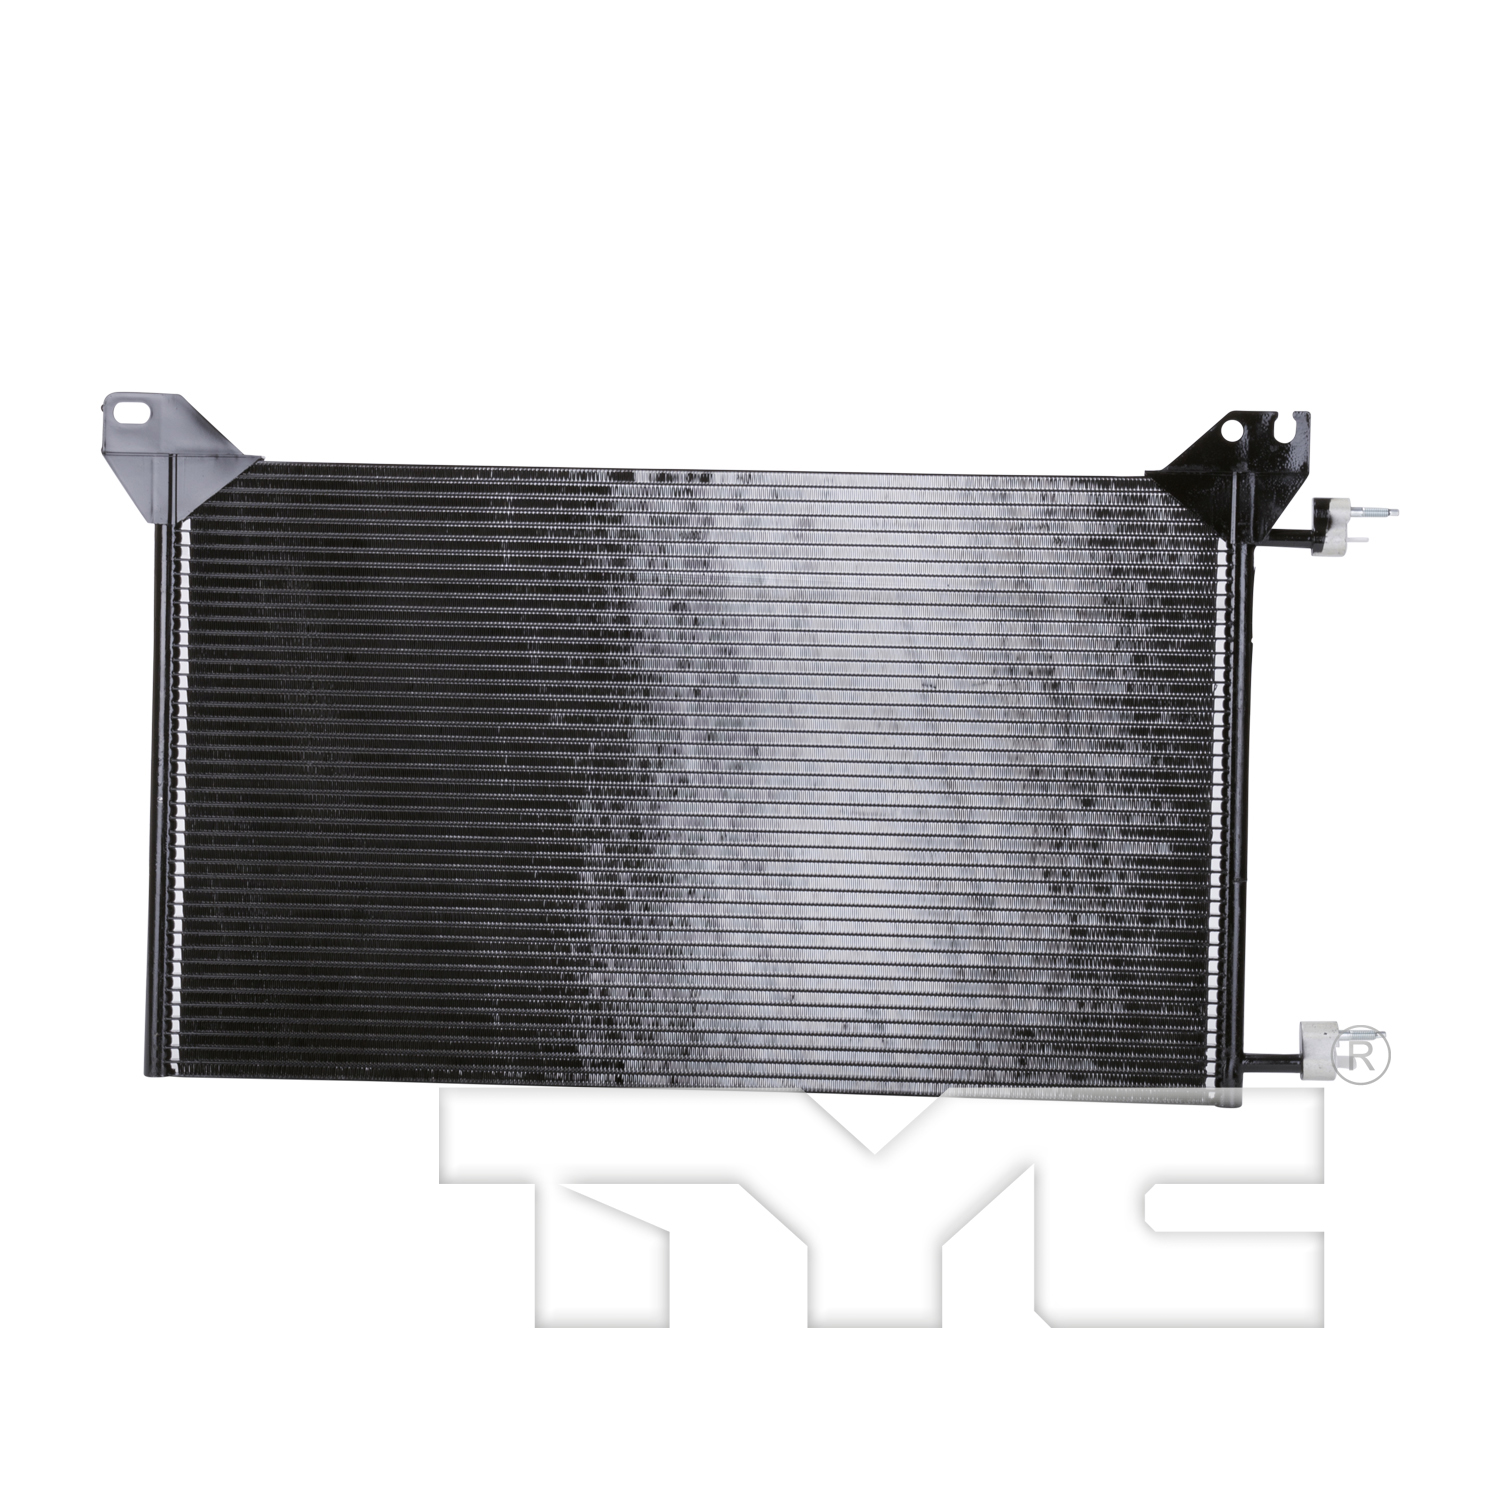 Aftermarket AC CONDENSERS for CHEVROLET - SUBURBAN 2500, SUBURBAN 2500,00-13,Air conditioning condenser